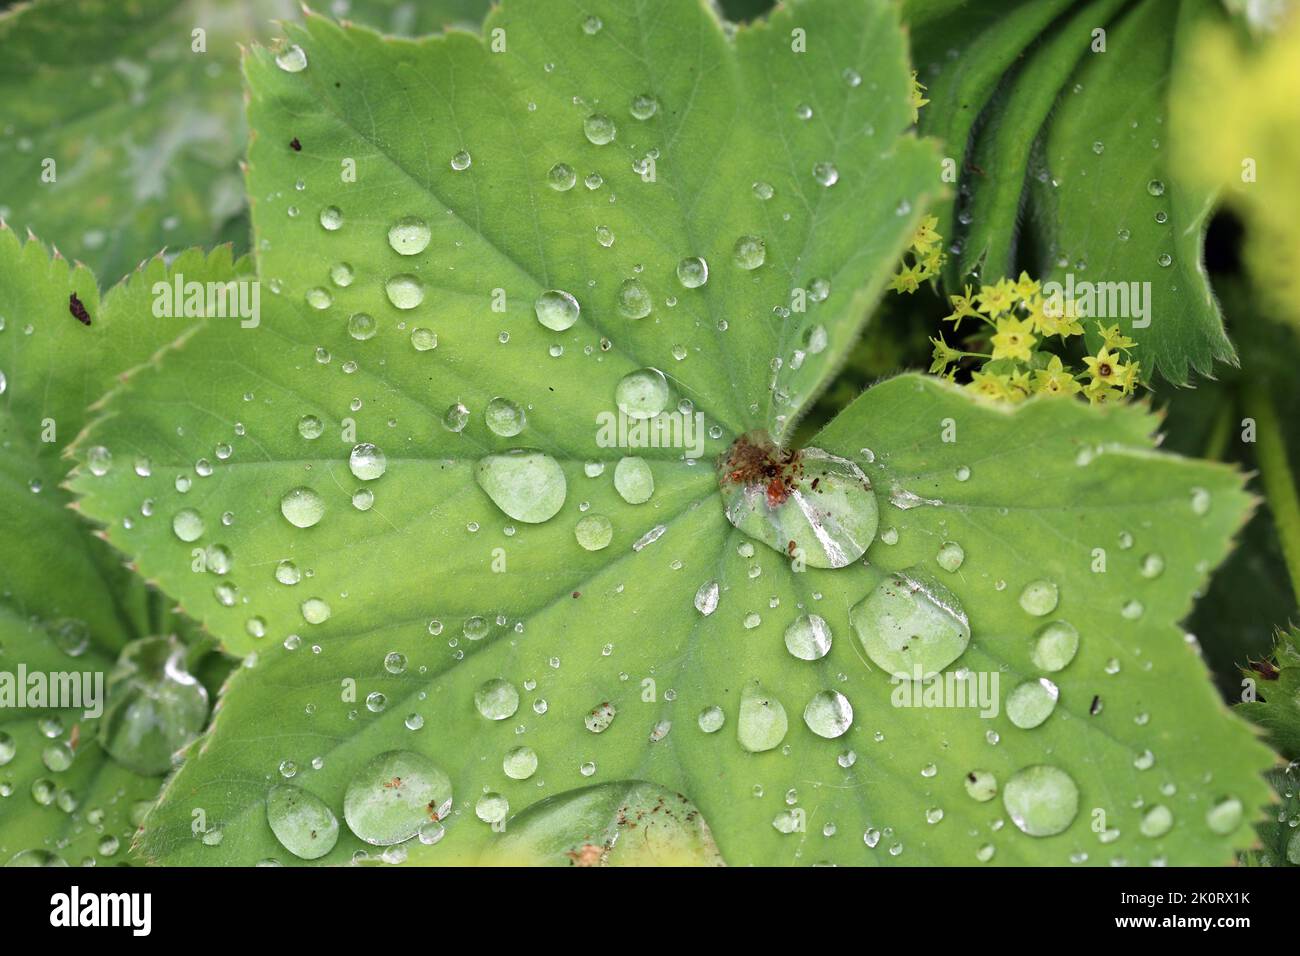 Ladys mantle, Alchemilla mollis, leaves and flowers in close up with raindrops and a background of blurred leaves. Stock Photo